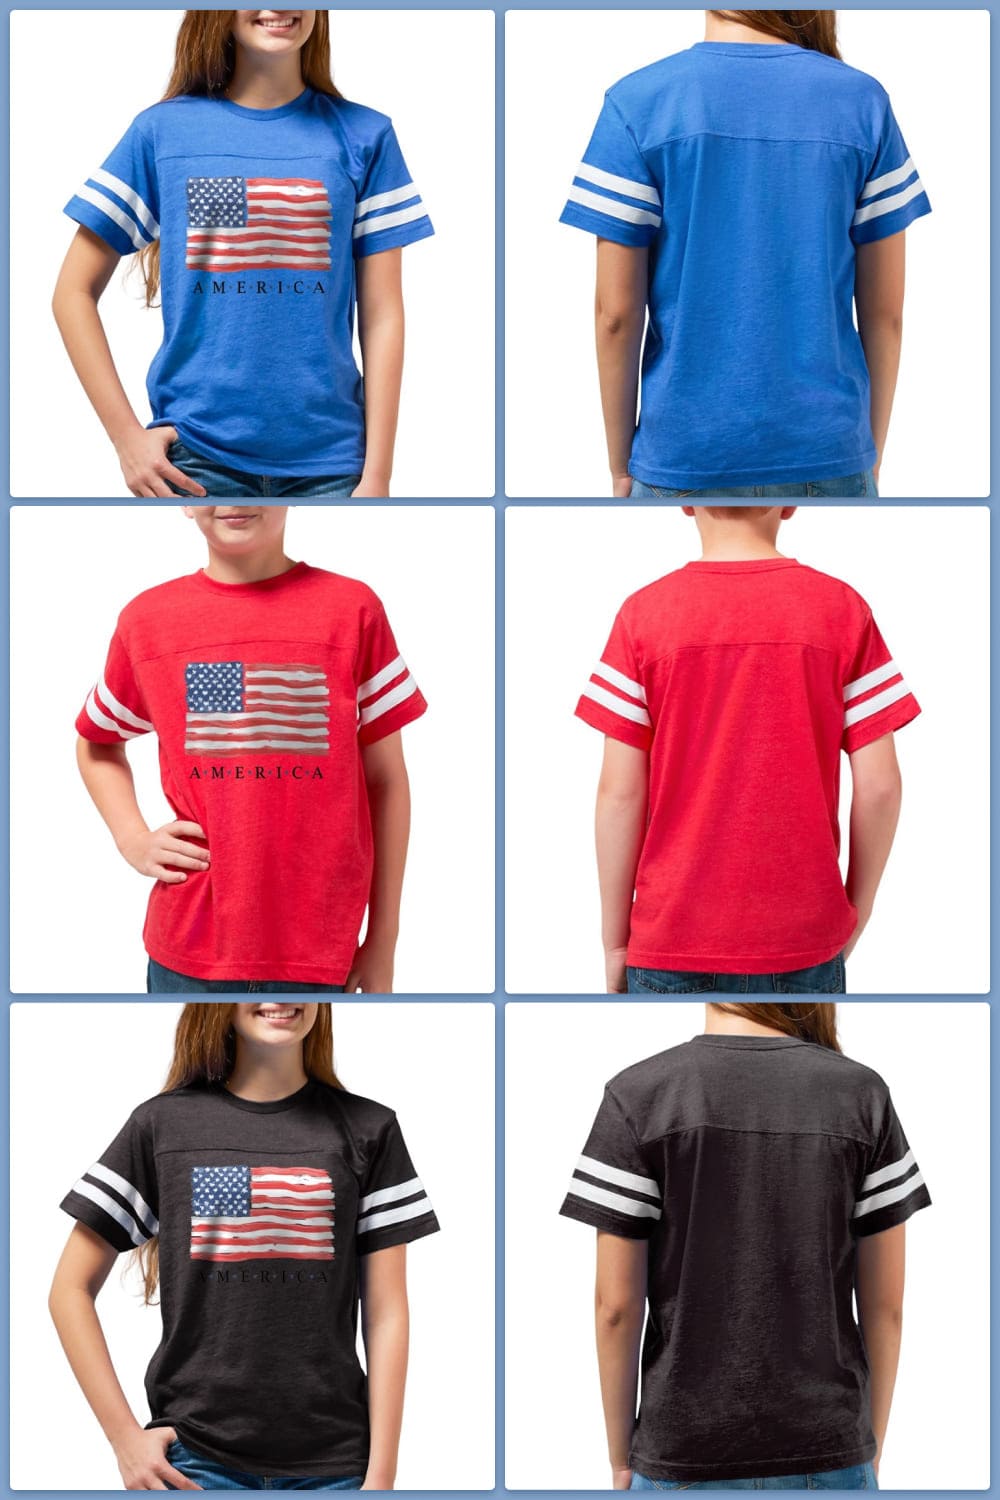 Collage of colorful t-shirts with USA flag.